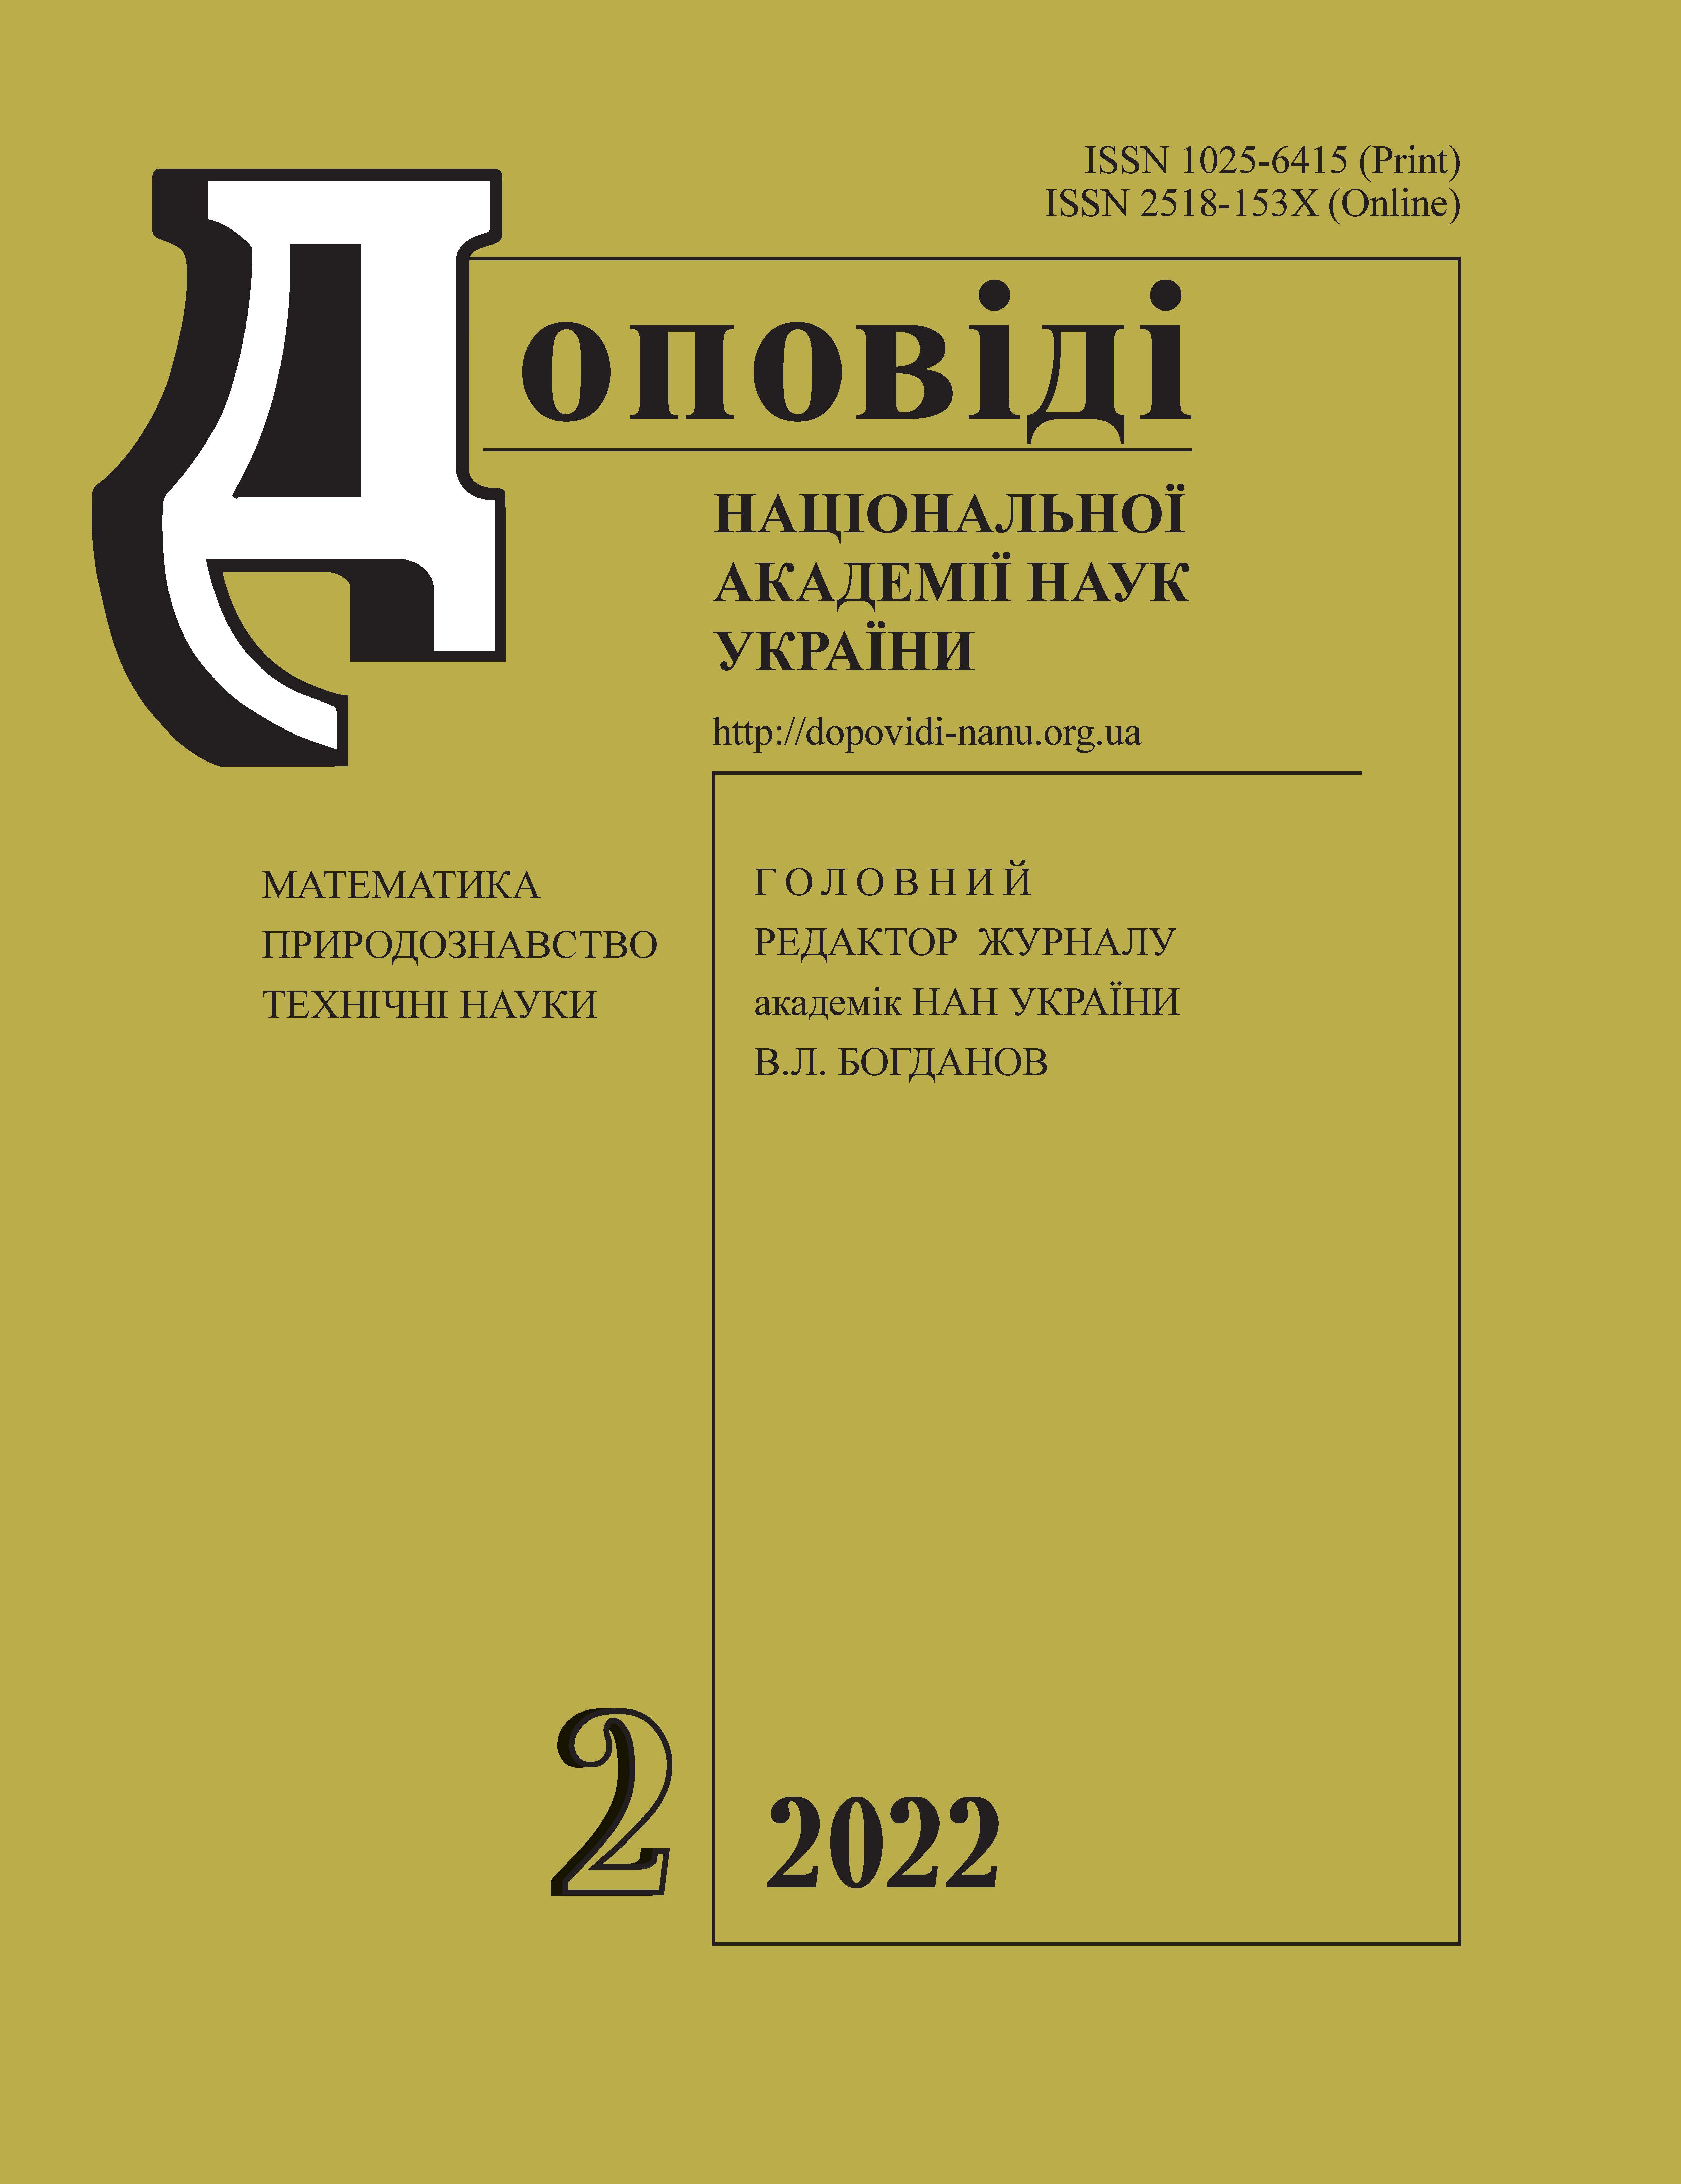 					View No. 2 (2022): Reports of the National Academy of Sciences of Ukraine
				